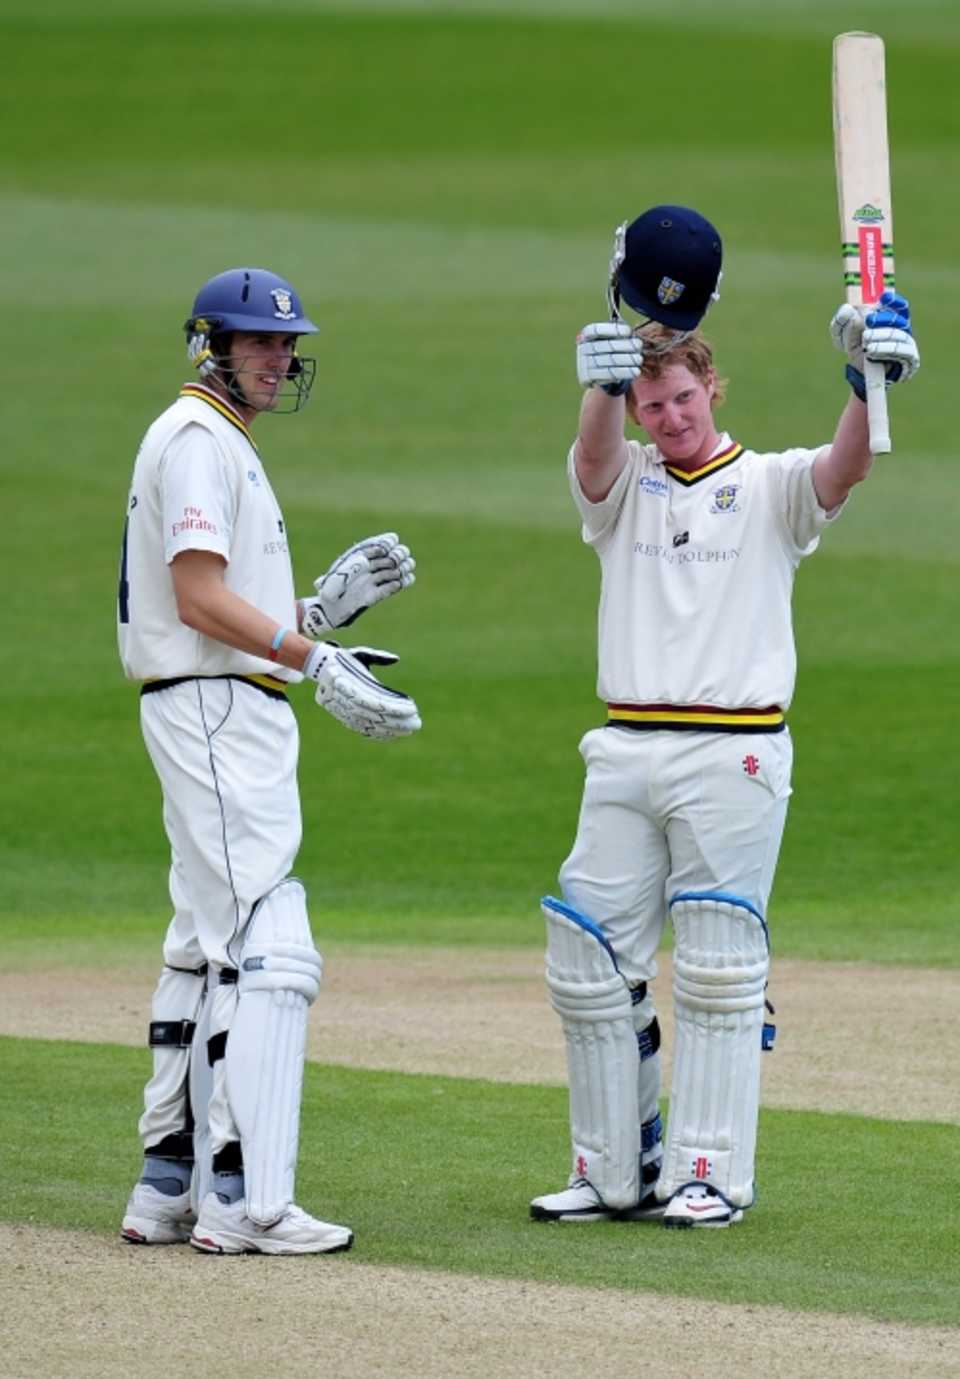 Durham sank to an innings defeat despite Ben Stokes' second-innings hundred, Nottinghamshire v Durham, County Championship, Division One, May 13, 2010